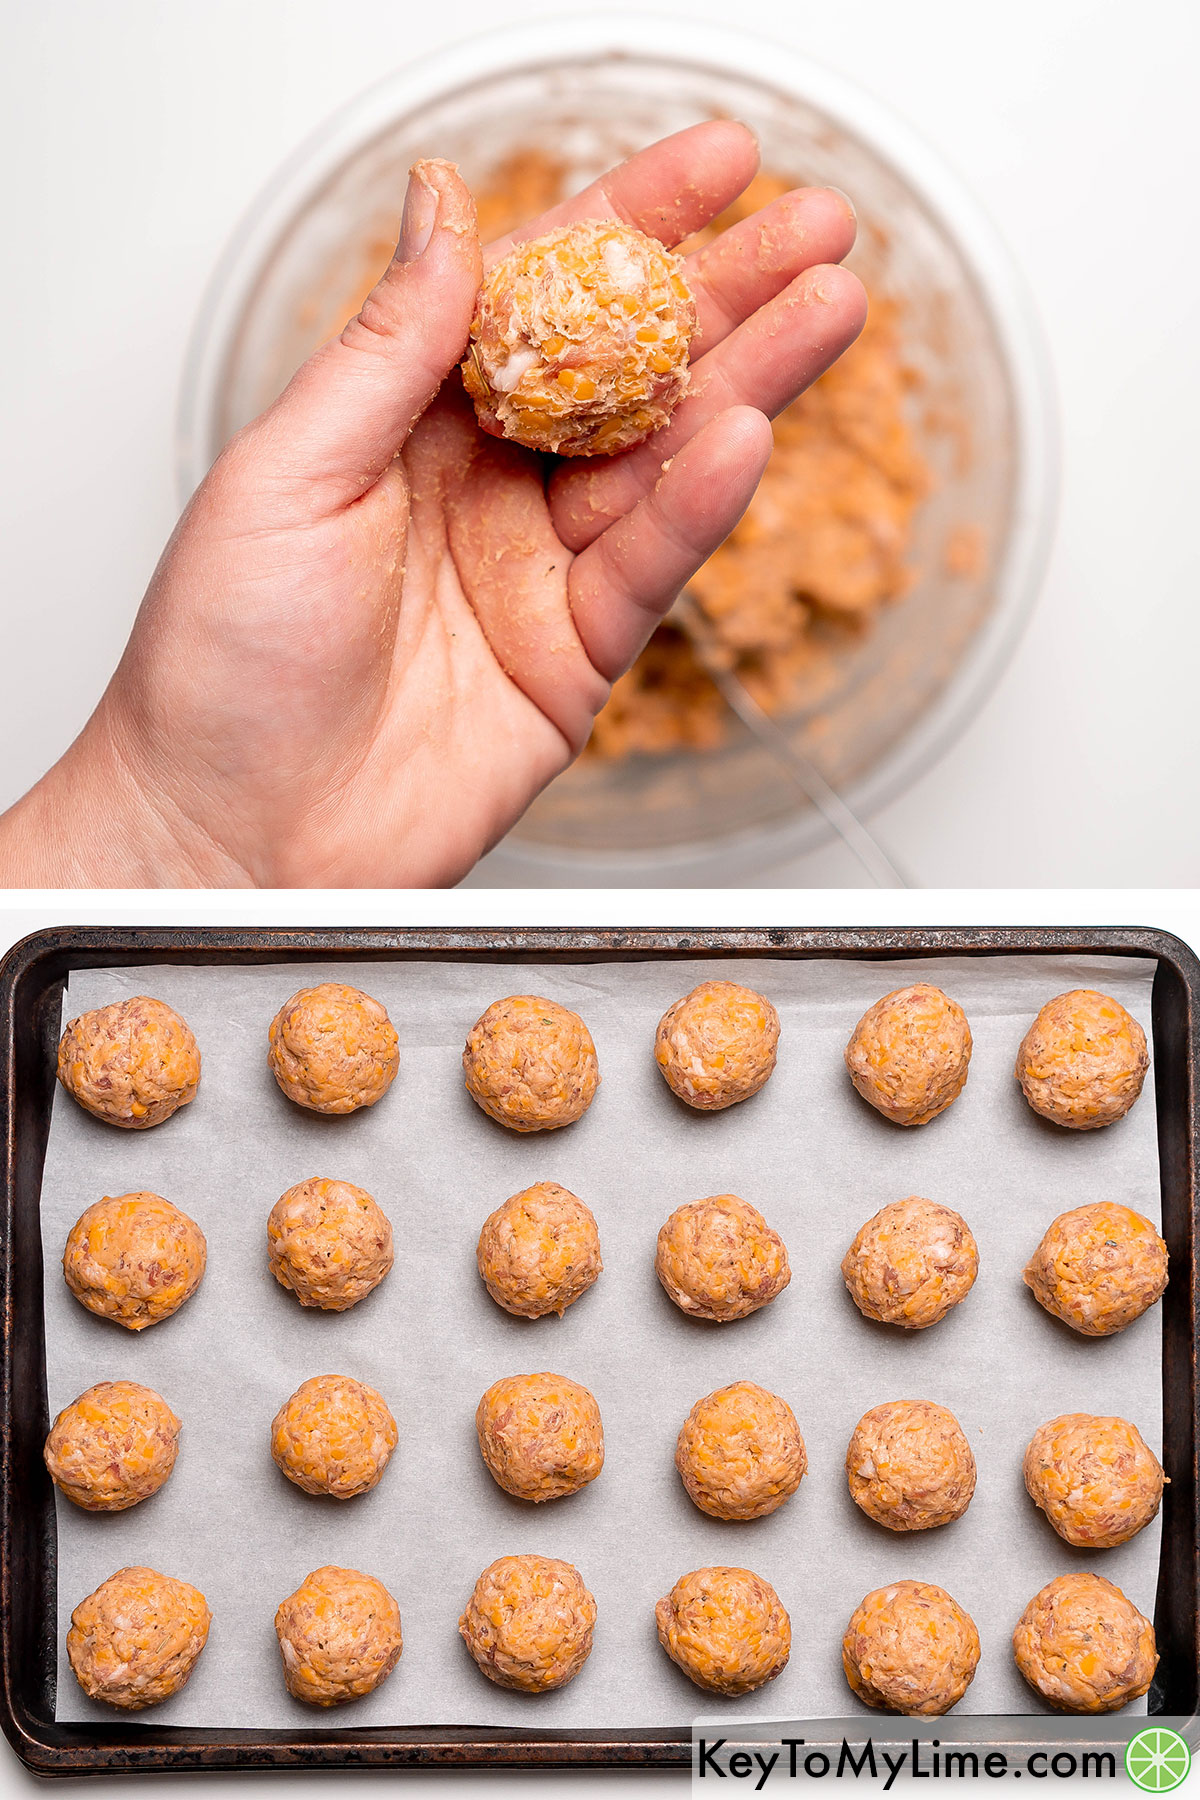 Forming sausage balls into 1-inch circles, then placing them on a parchment paper lined baking sheet.